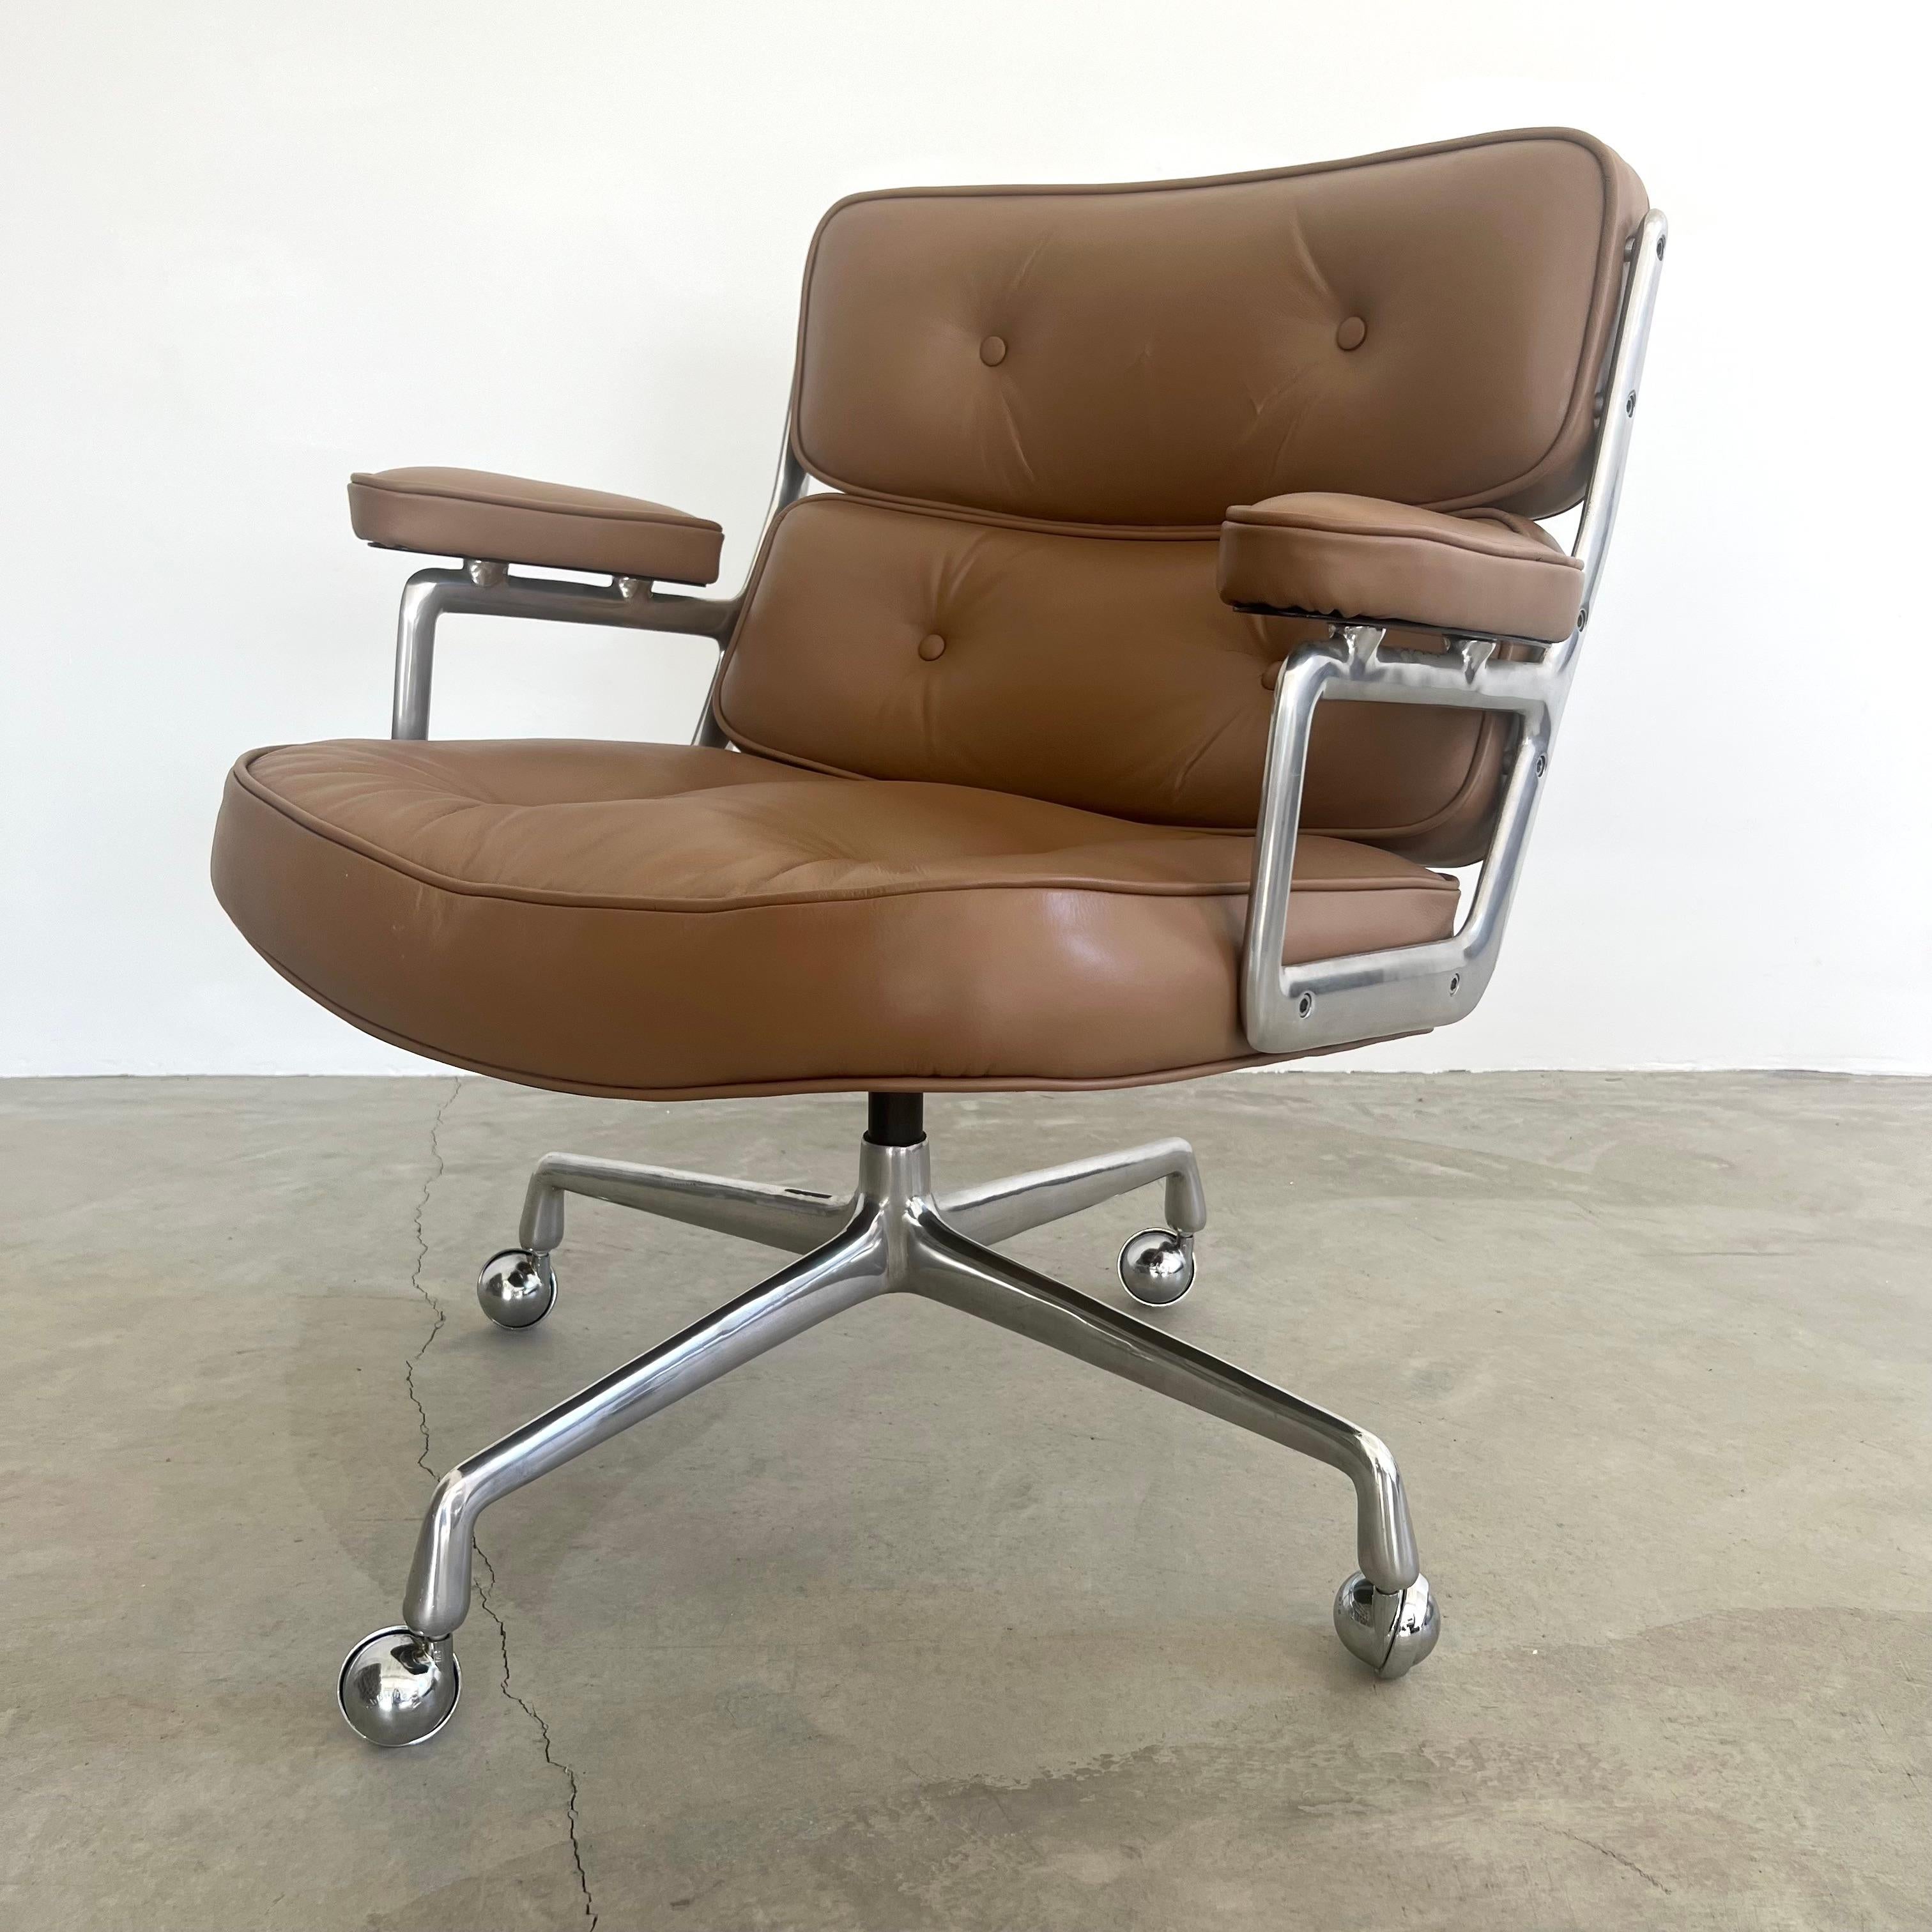 Eames Time Life Lobby Lounge Chair in Tan Leather for Herman Miller, 1980s USA 8